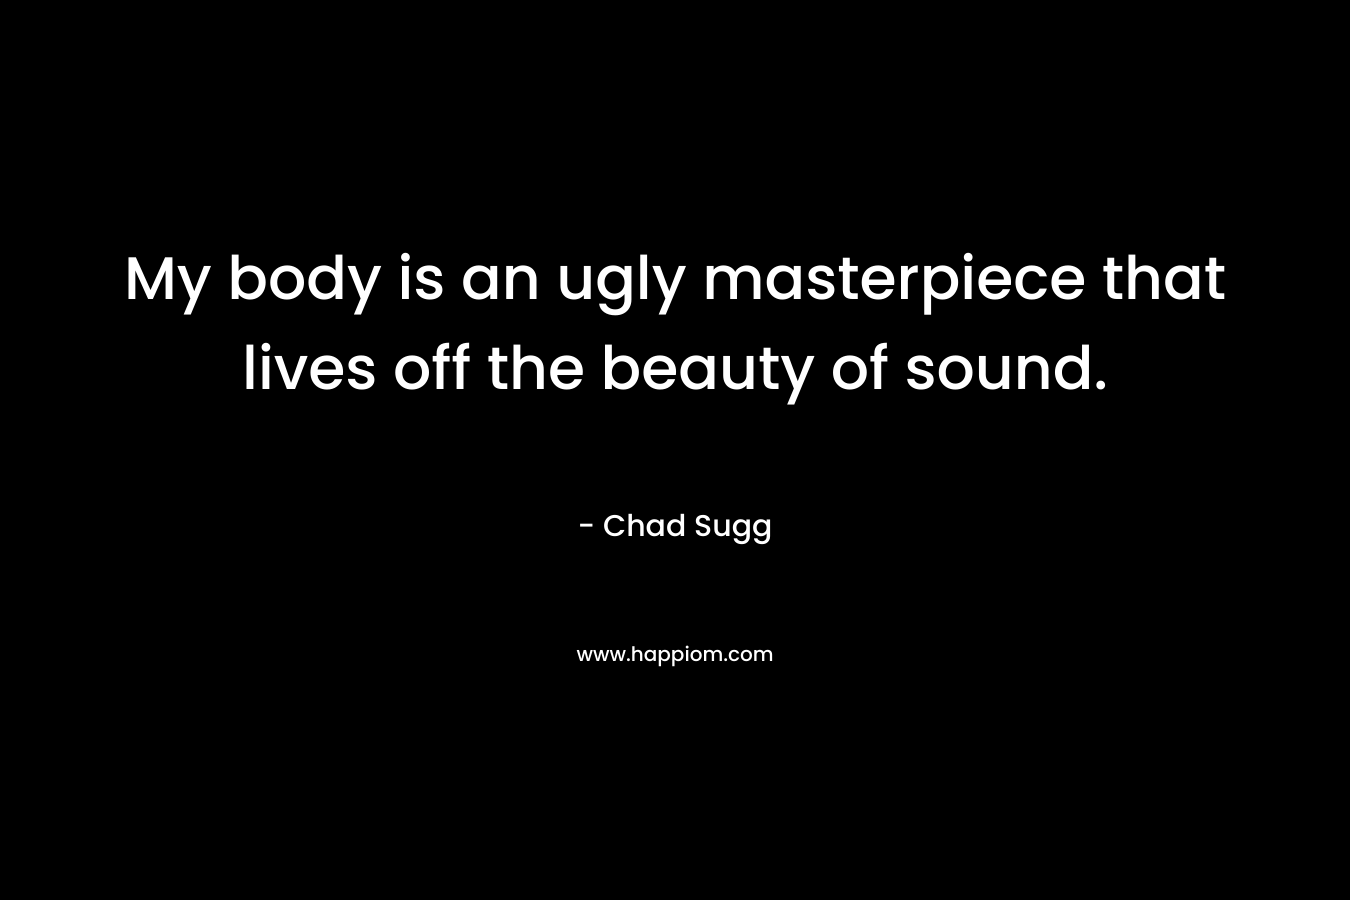 My body is an ugly masterpiece that lives off the beauty of sound.